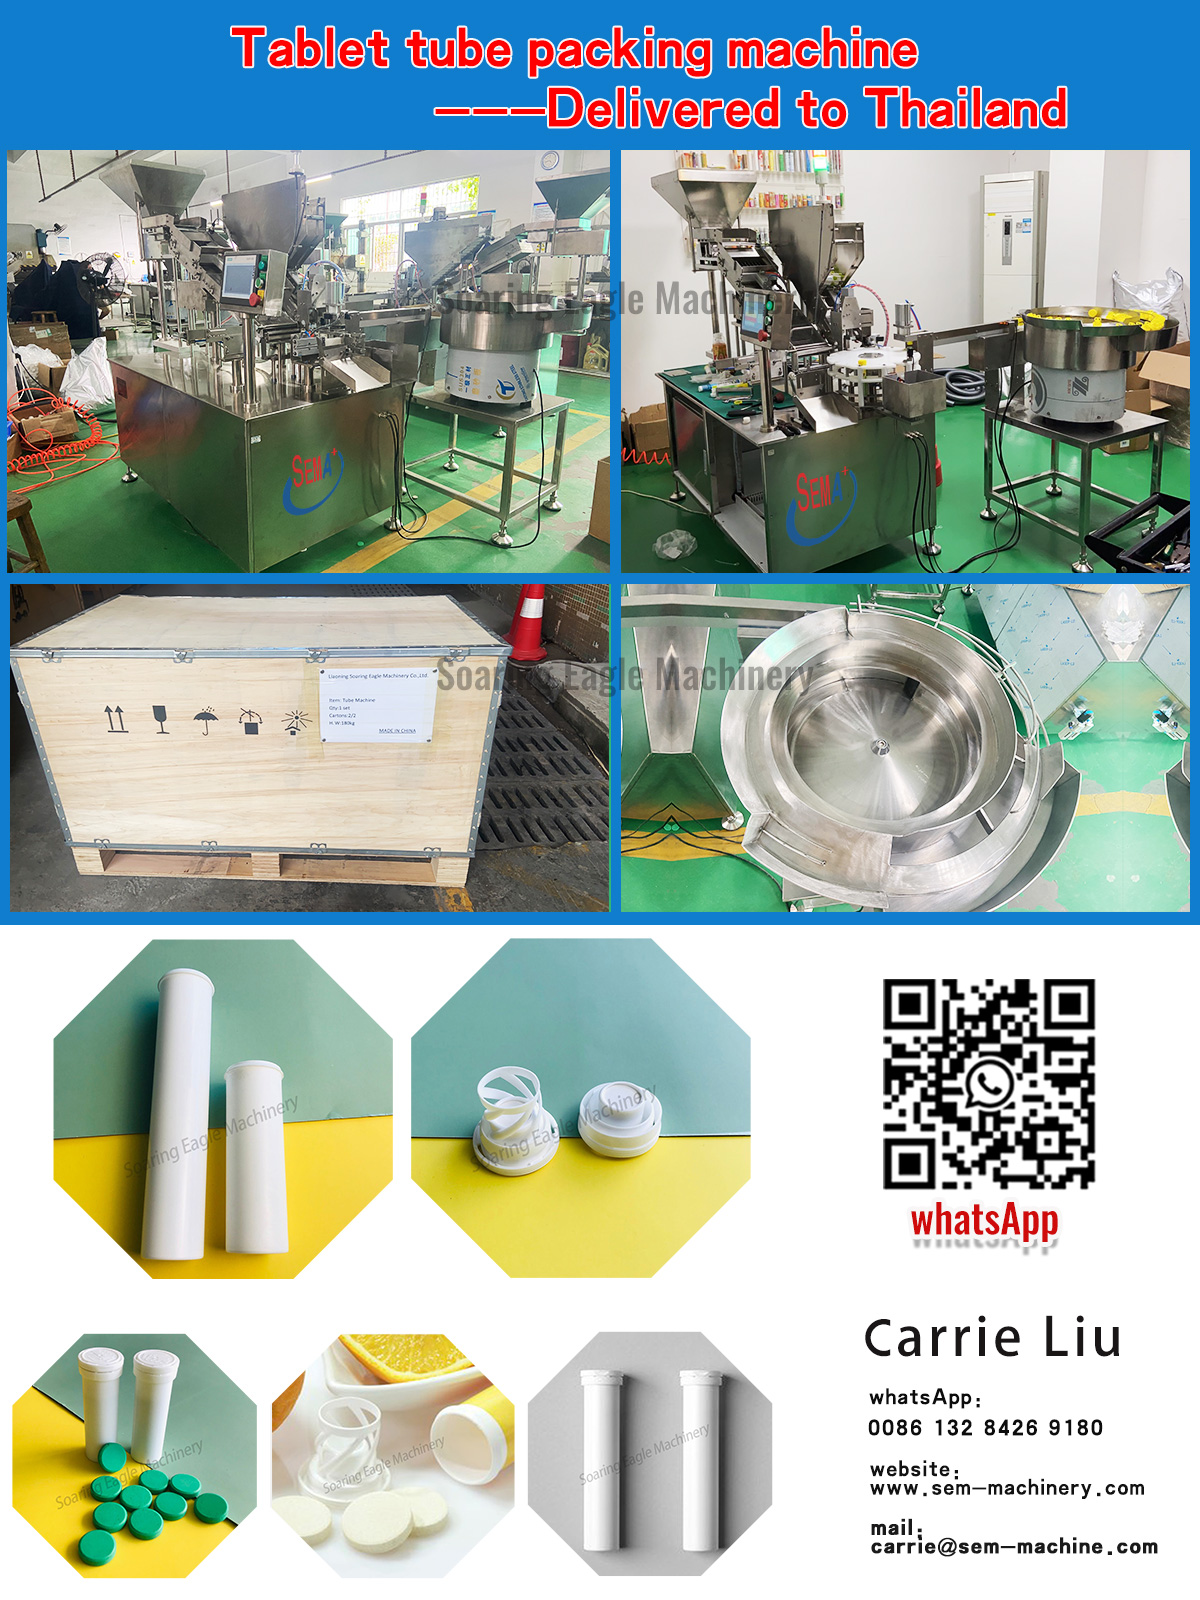 Machine Delivery Tablet tube packing machine—delivered to Thailand